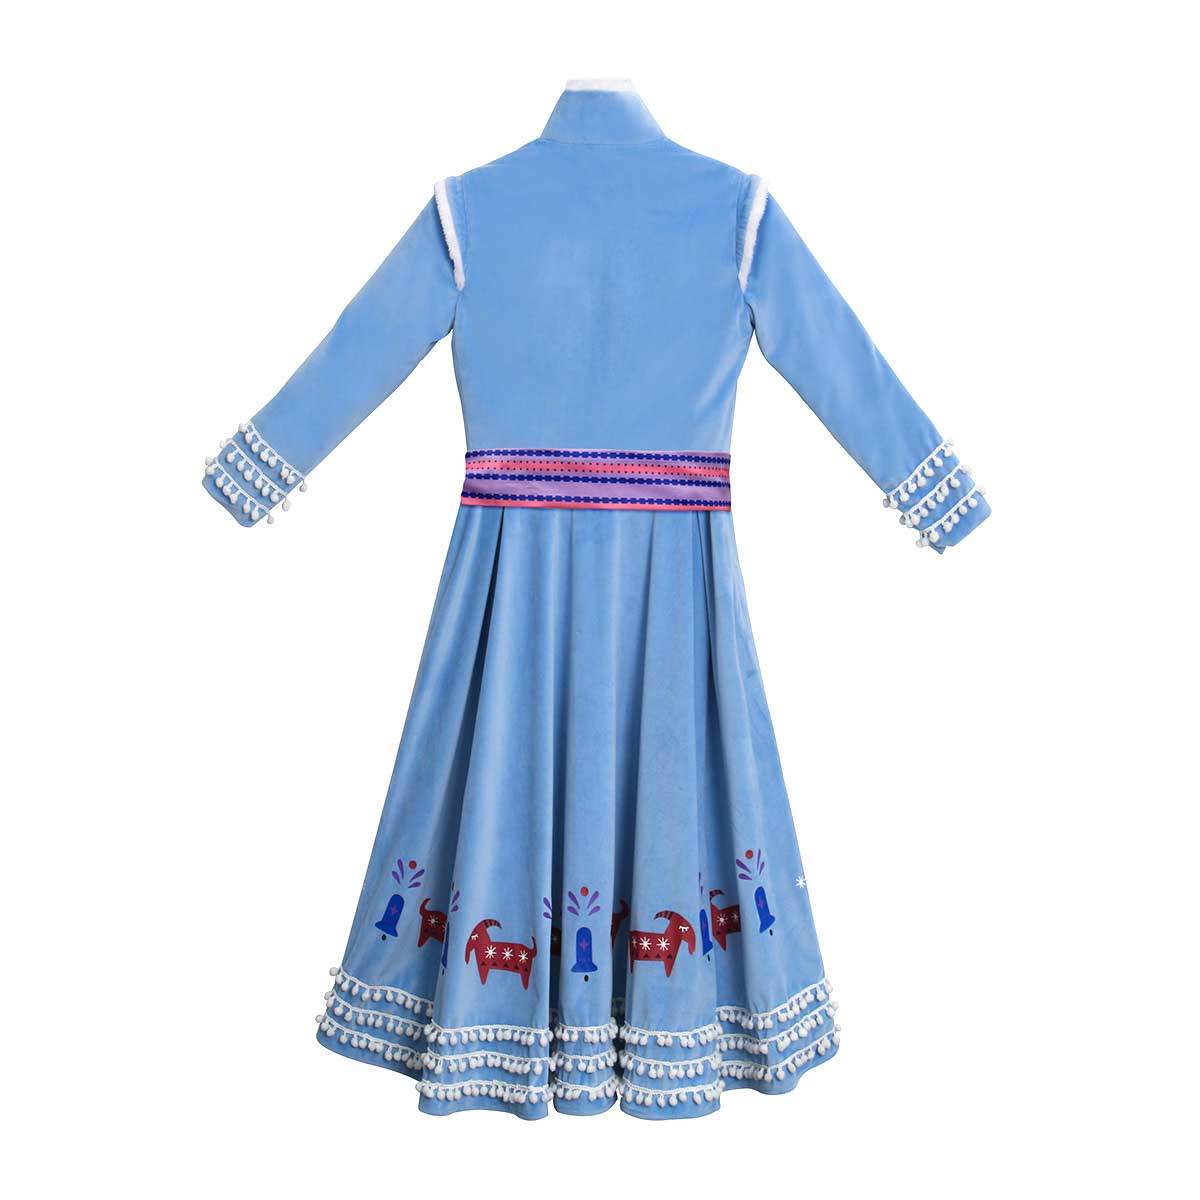 Olaf's Frozen Adventure Adult Anna Dress Outfit Cosplay Costume